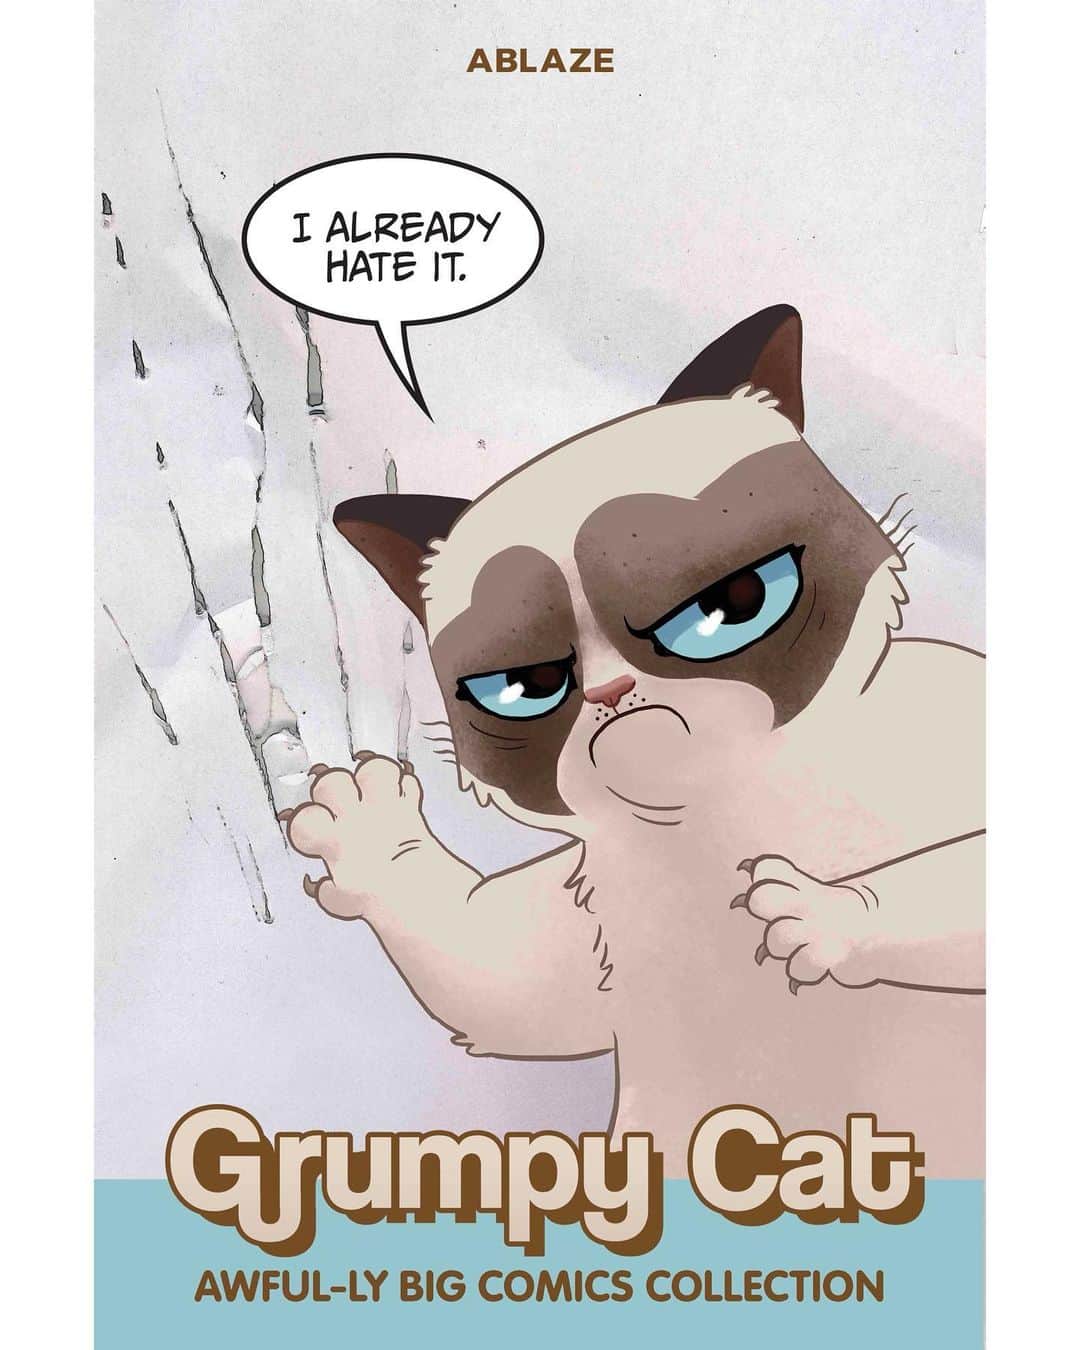 Grumpy Catのインスタグラム：「Available Now for Preorder: Grumpy Cat's Awful-ly Big Comics Collection from Ablaze Publishing!  Find it everywhere Graphic Novels are sold! Including Amazon, Barnes & Noble, Comixology, and Indie book & comic stores: http://www.comicshoplocator.com/」